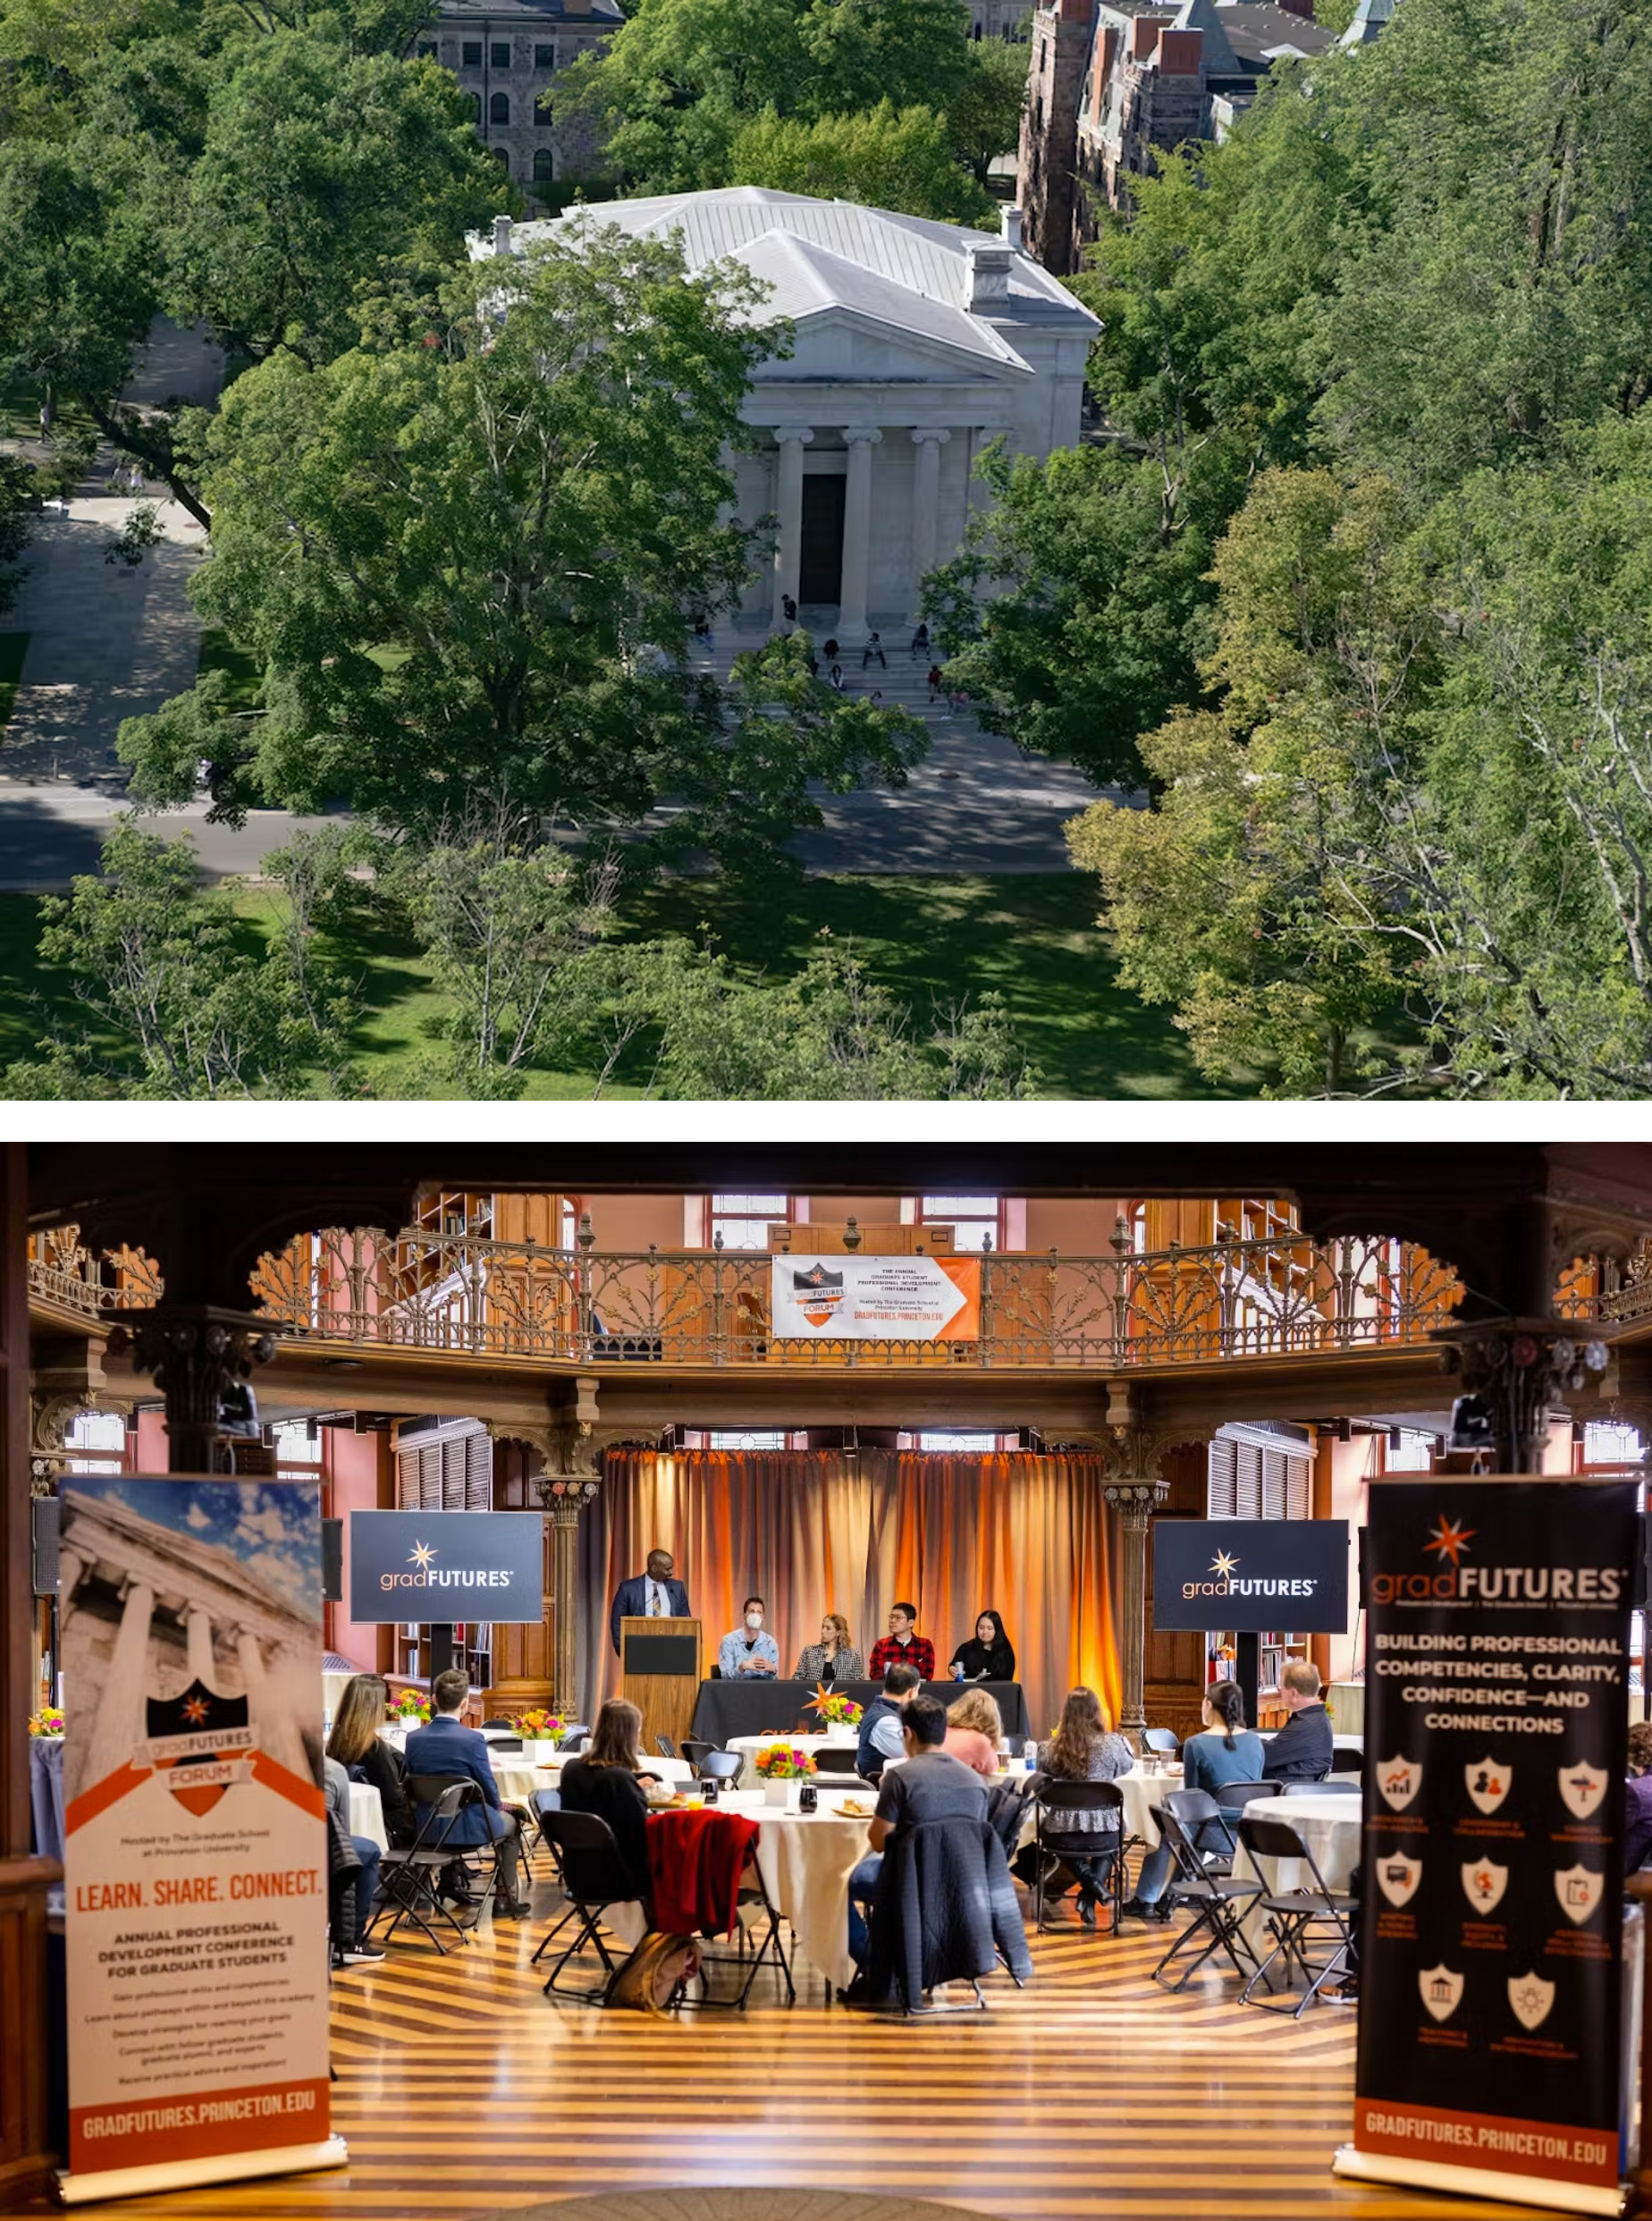 princeton university's clio hall and also an event sponsored by the graduate school; two images stacked on top of one another